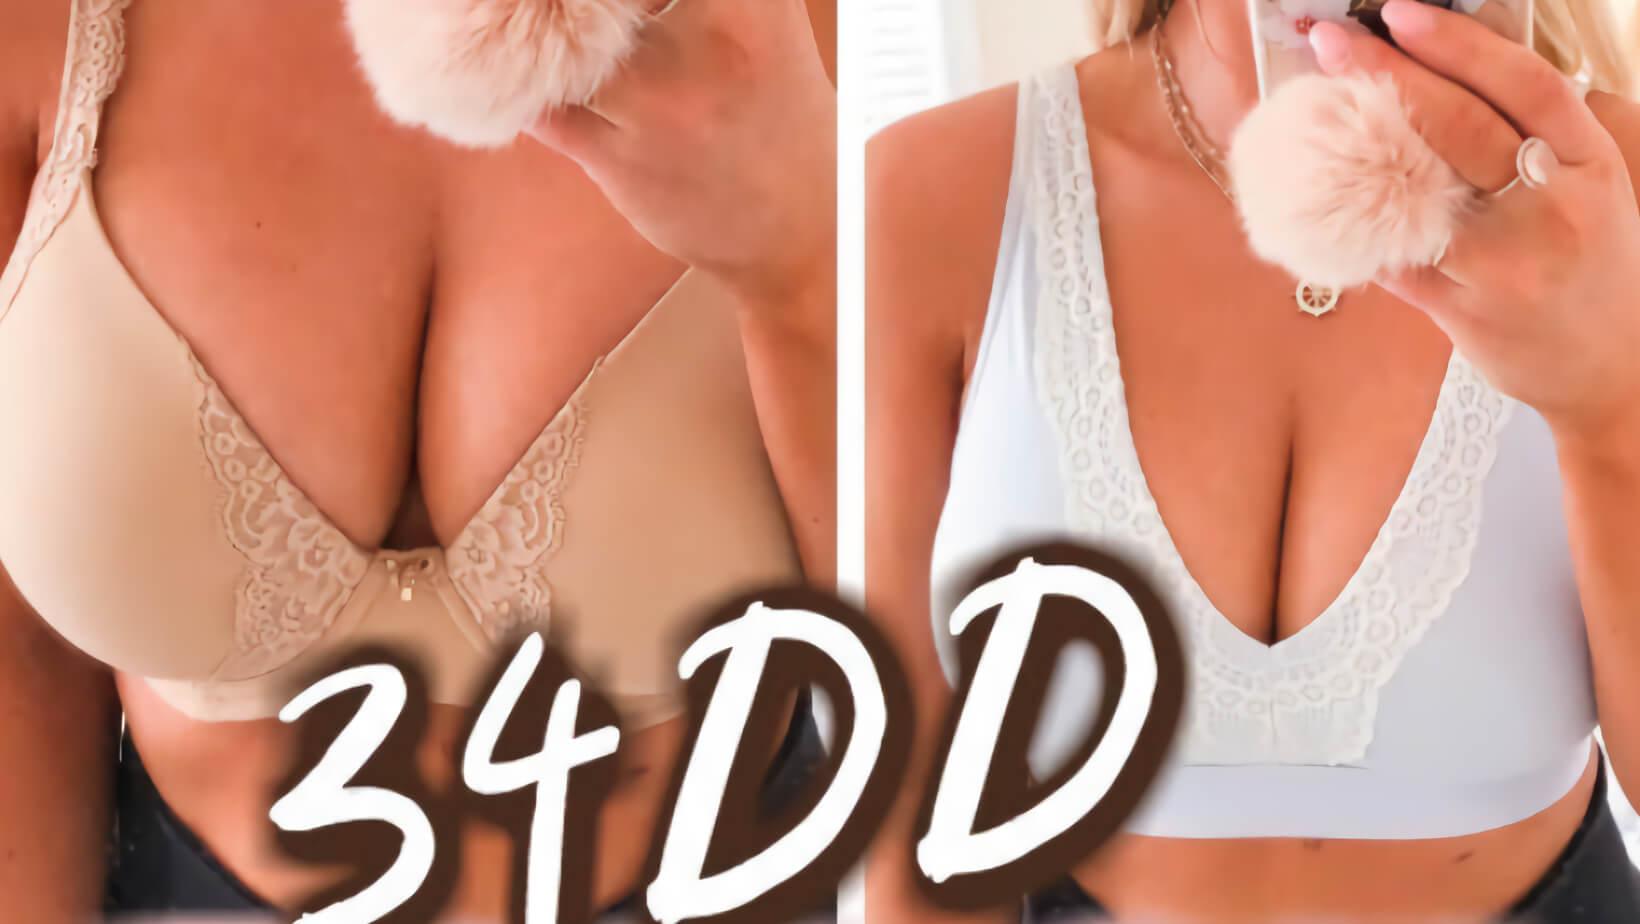 daisy rice recommends what do 34dd breast look like pic